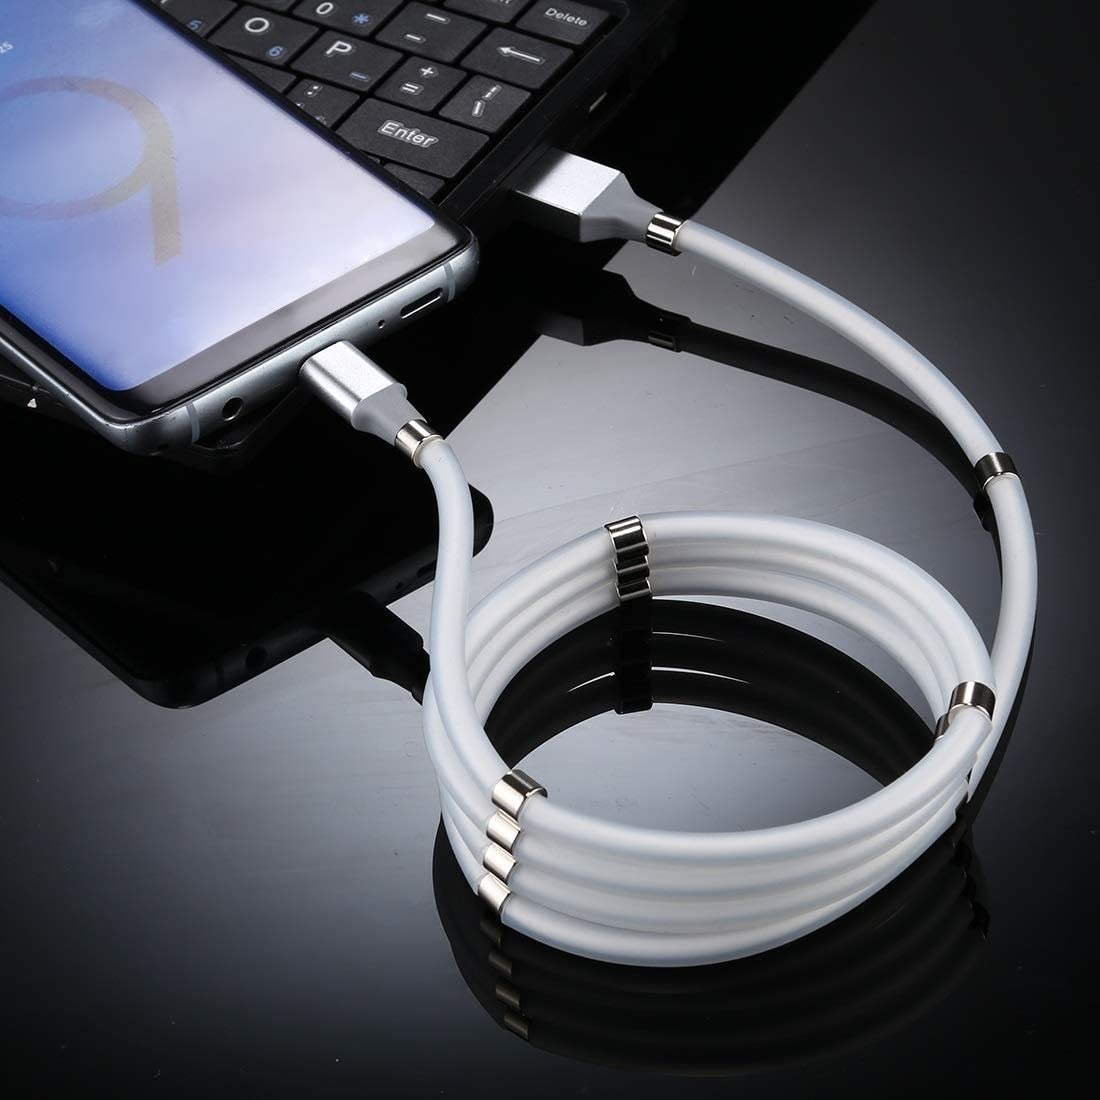 USB C Type C Magnetic Attraction CABLE%201399%20(26)%20(Copy)